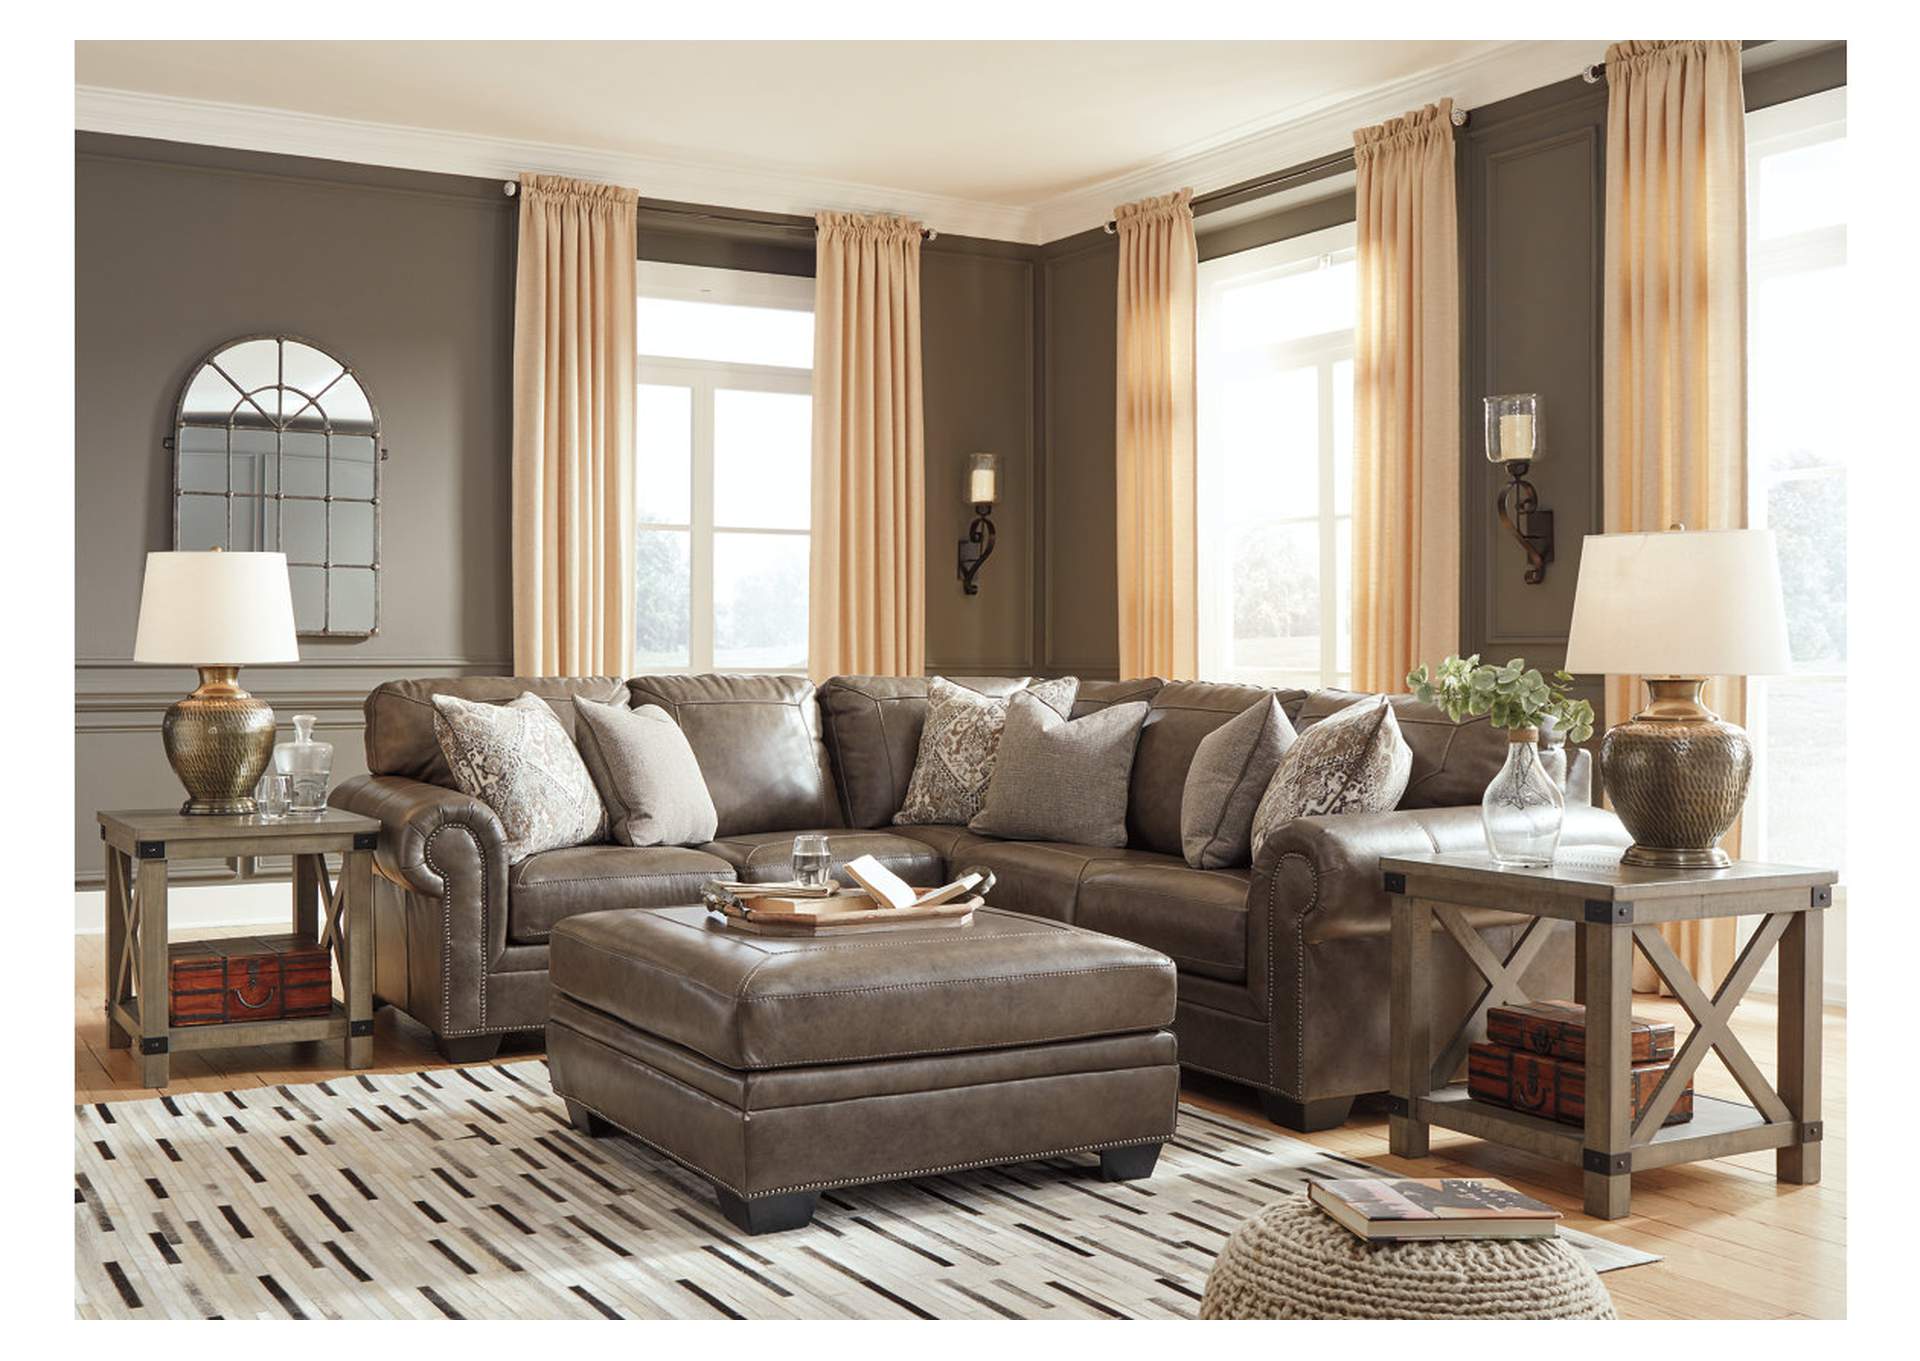 Roleson Quarry 2 Piece Sectional,Signature Design By Ashley